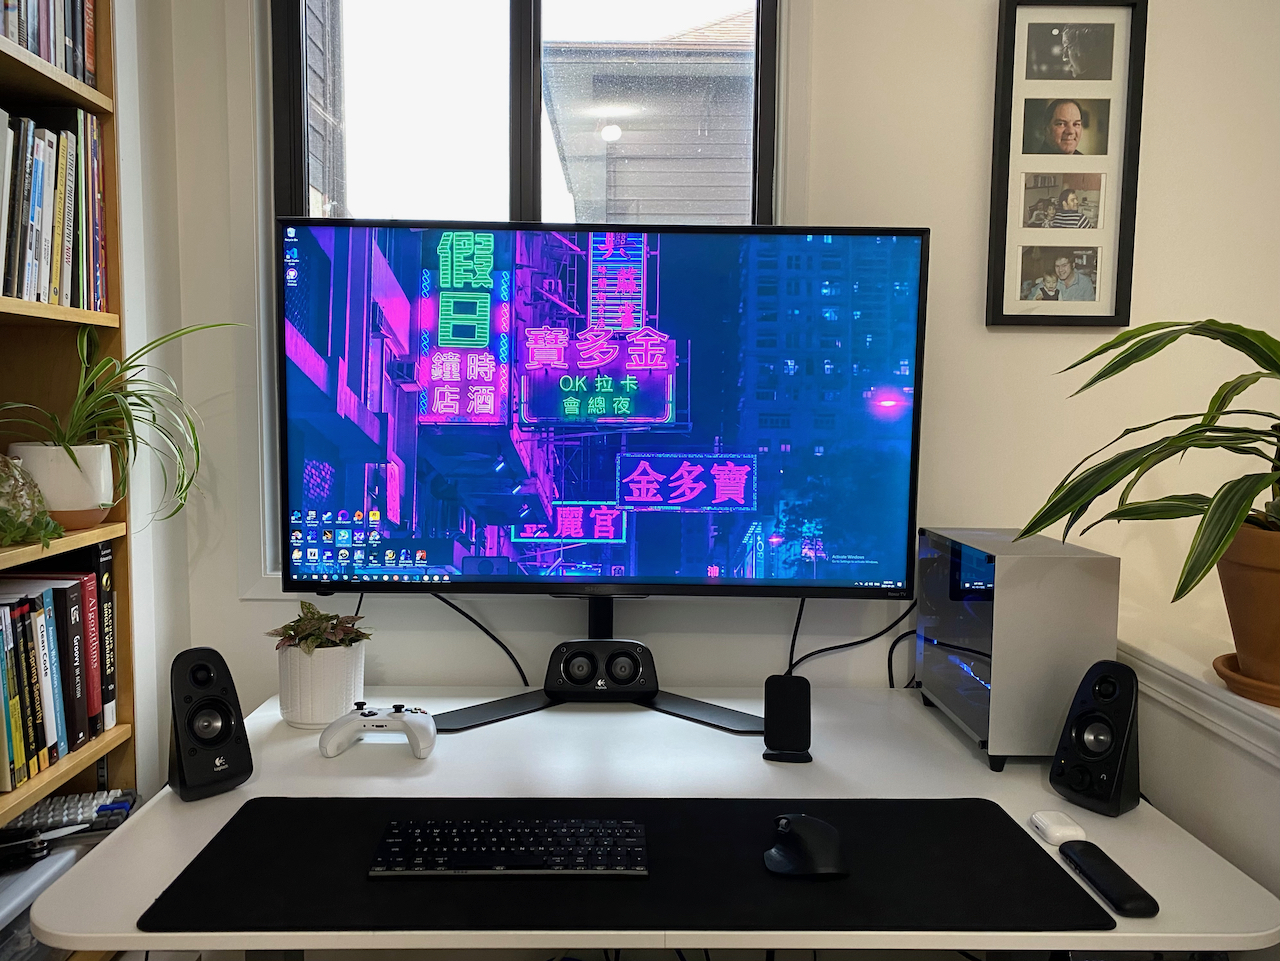 Wide picture of entire desk showing my monitor, pc, keyboard, mouse, and speakers. There is a window behind the monitor and plants on either side.